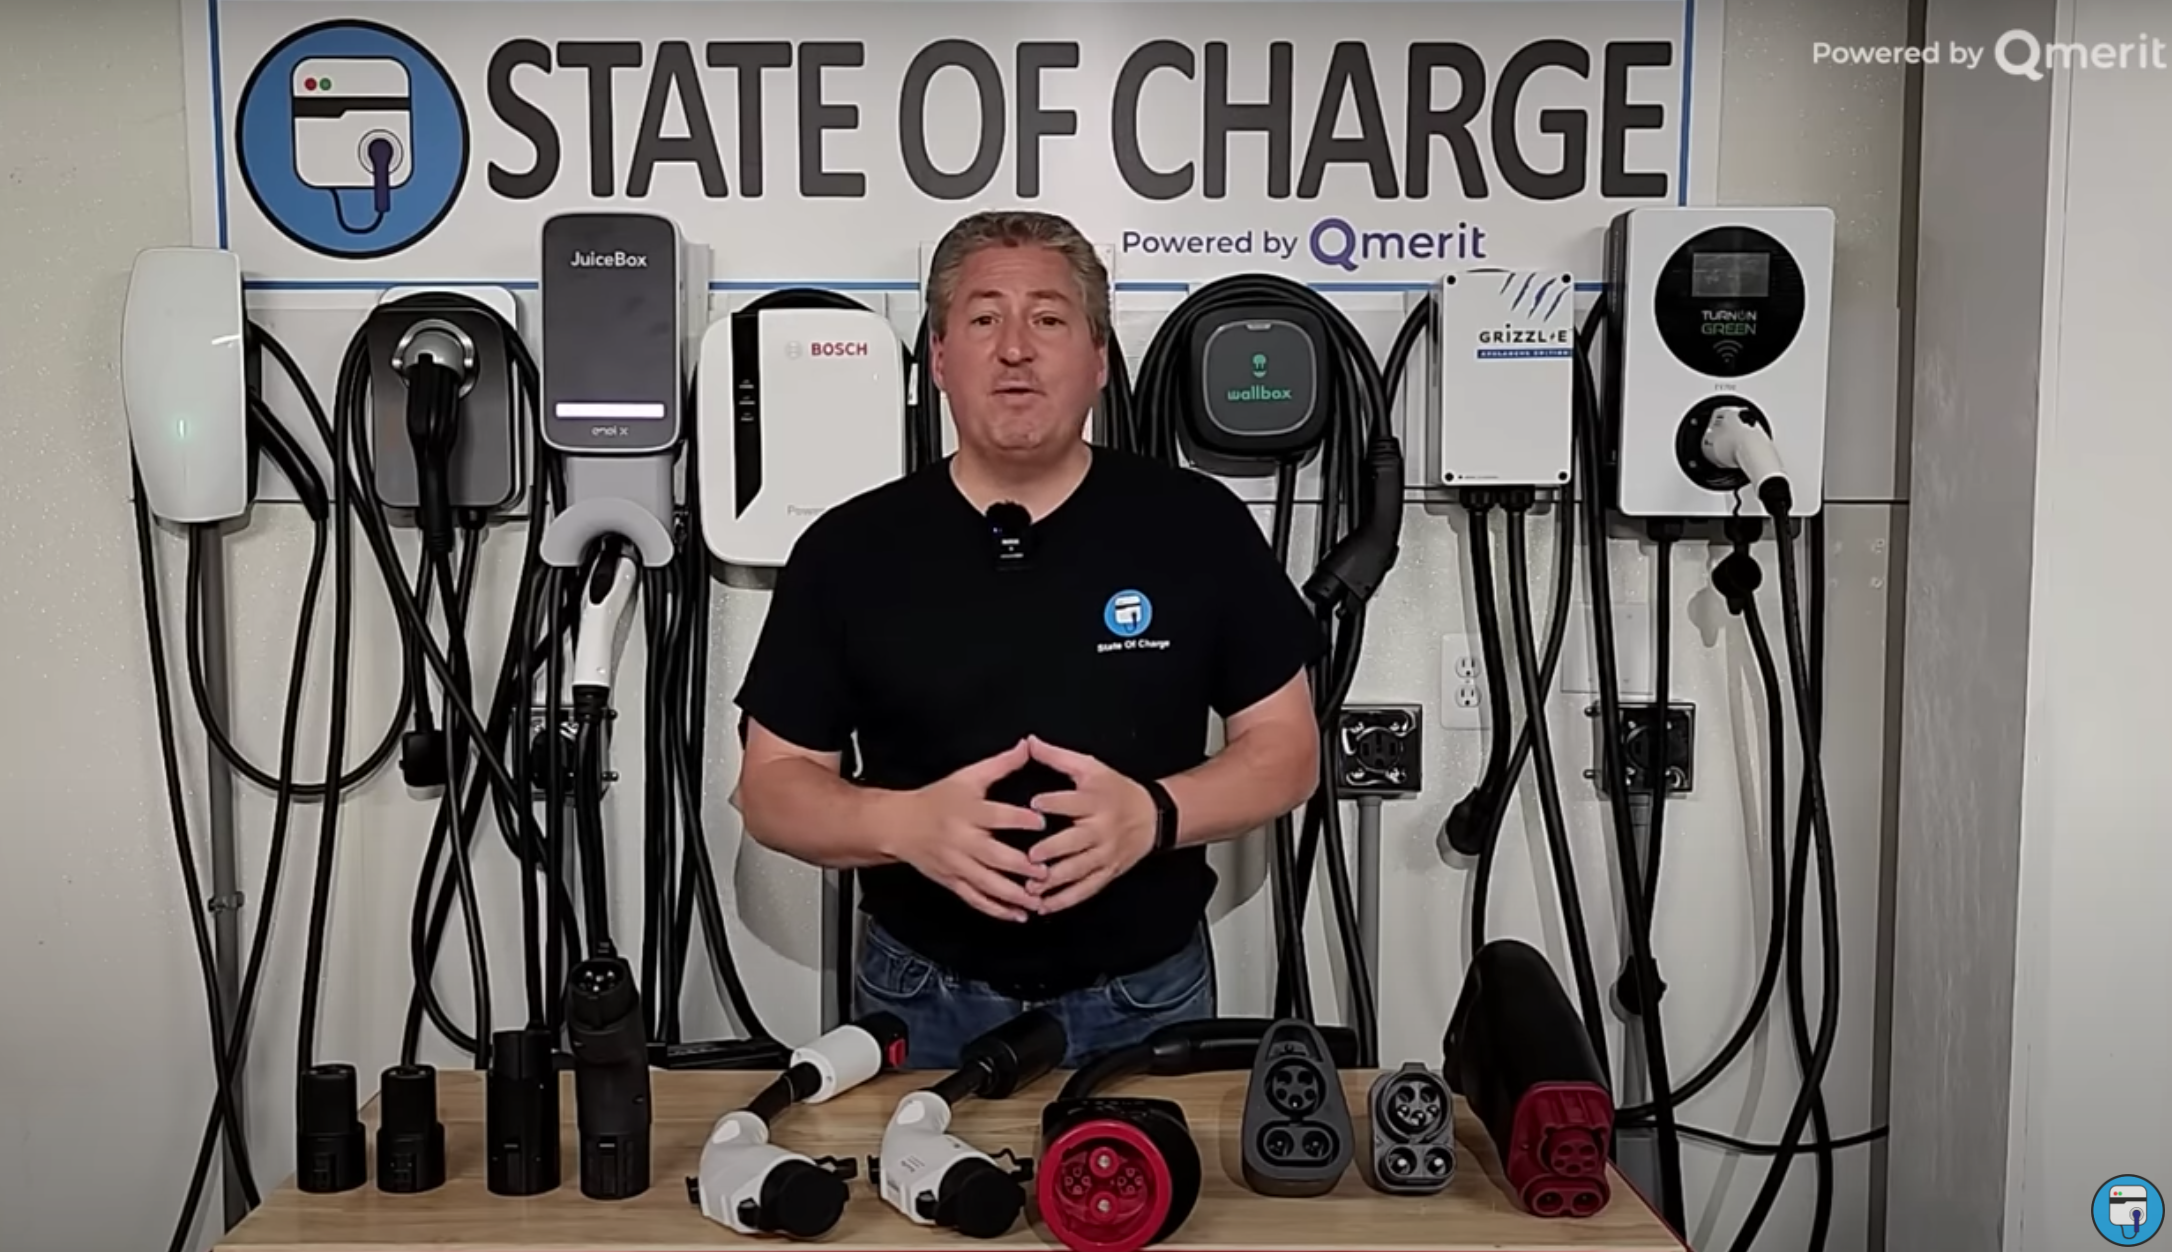 Tom's collection of EV adapters and extension cables